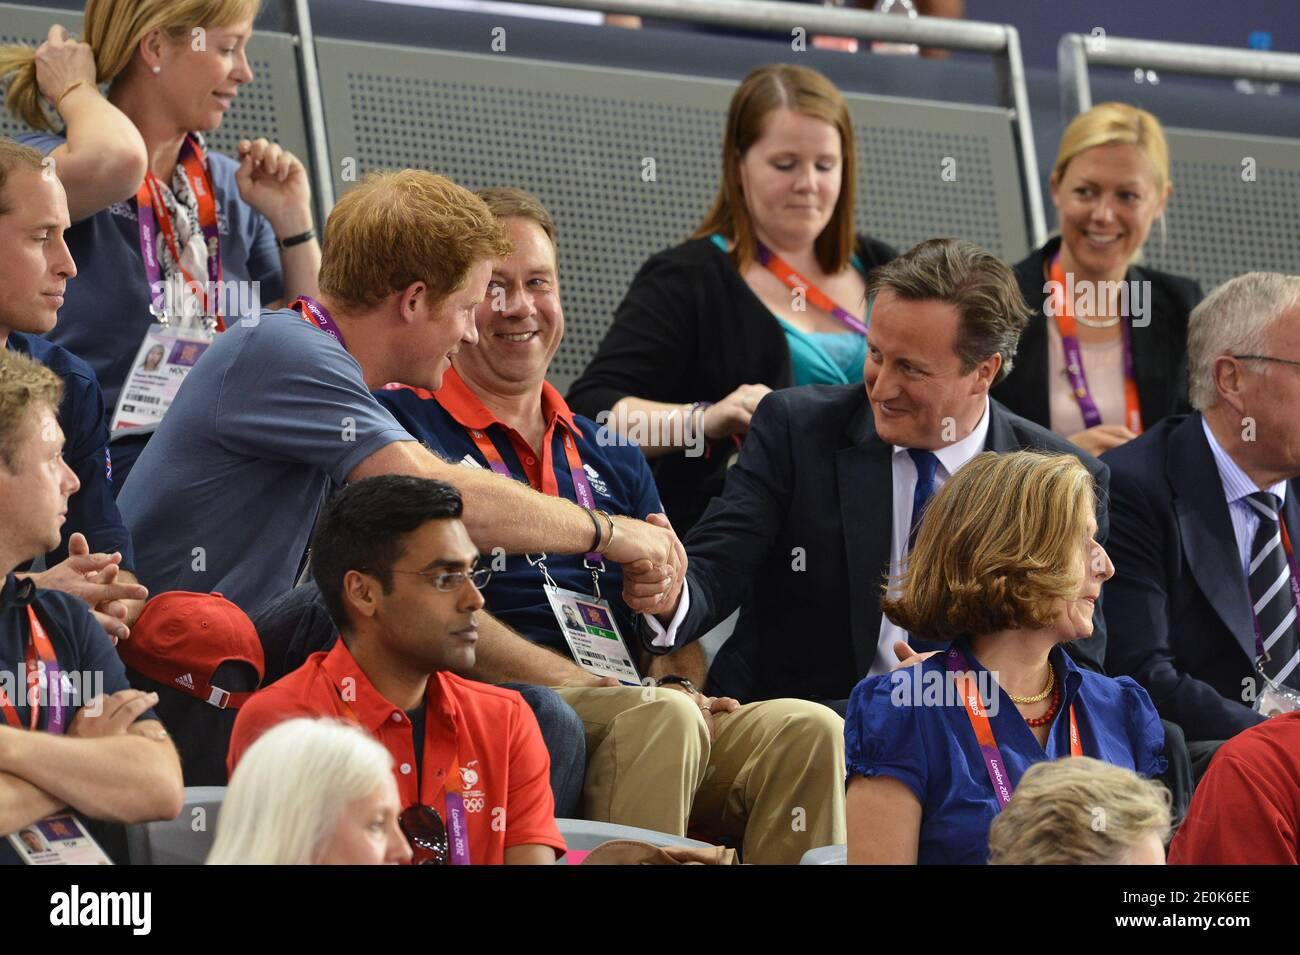 Prince Harry and David Cameron attend the Cycling during day six of the Olympic Games at the Velodrome in London, UK on August 2, 2012. Photo by Gouhier-Guibbaud-JMP/ABACAPRESS.COM Stock Photo